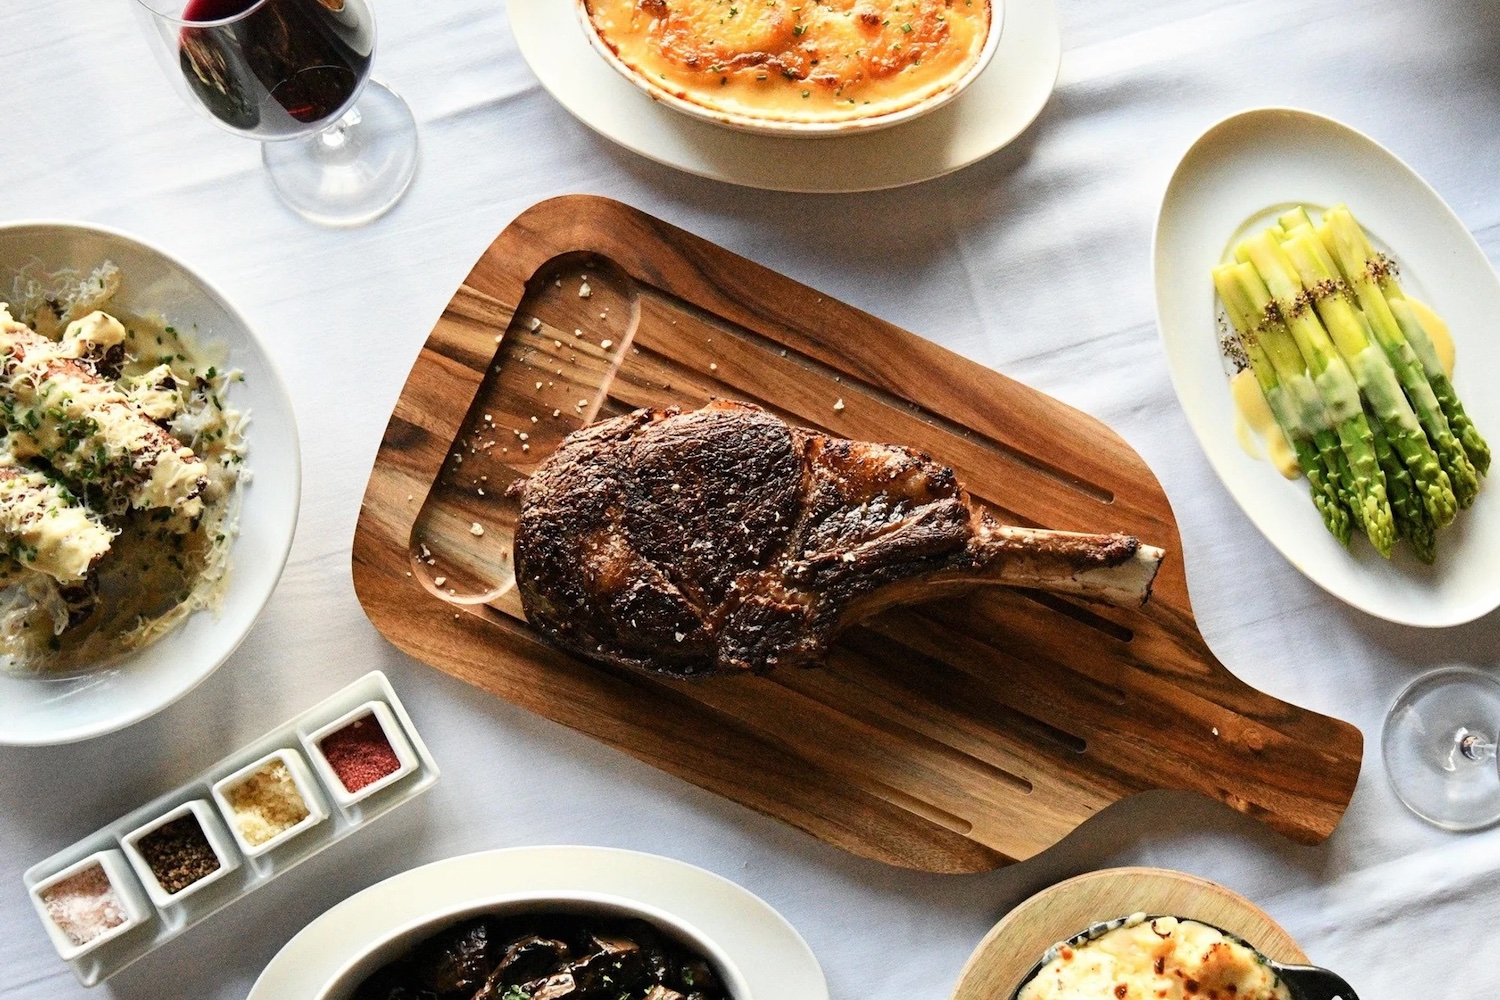 a steakhouse spread on a white tablecloth including steak, asparagus, manicotti and red wine